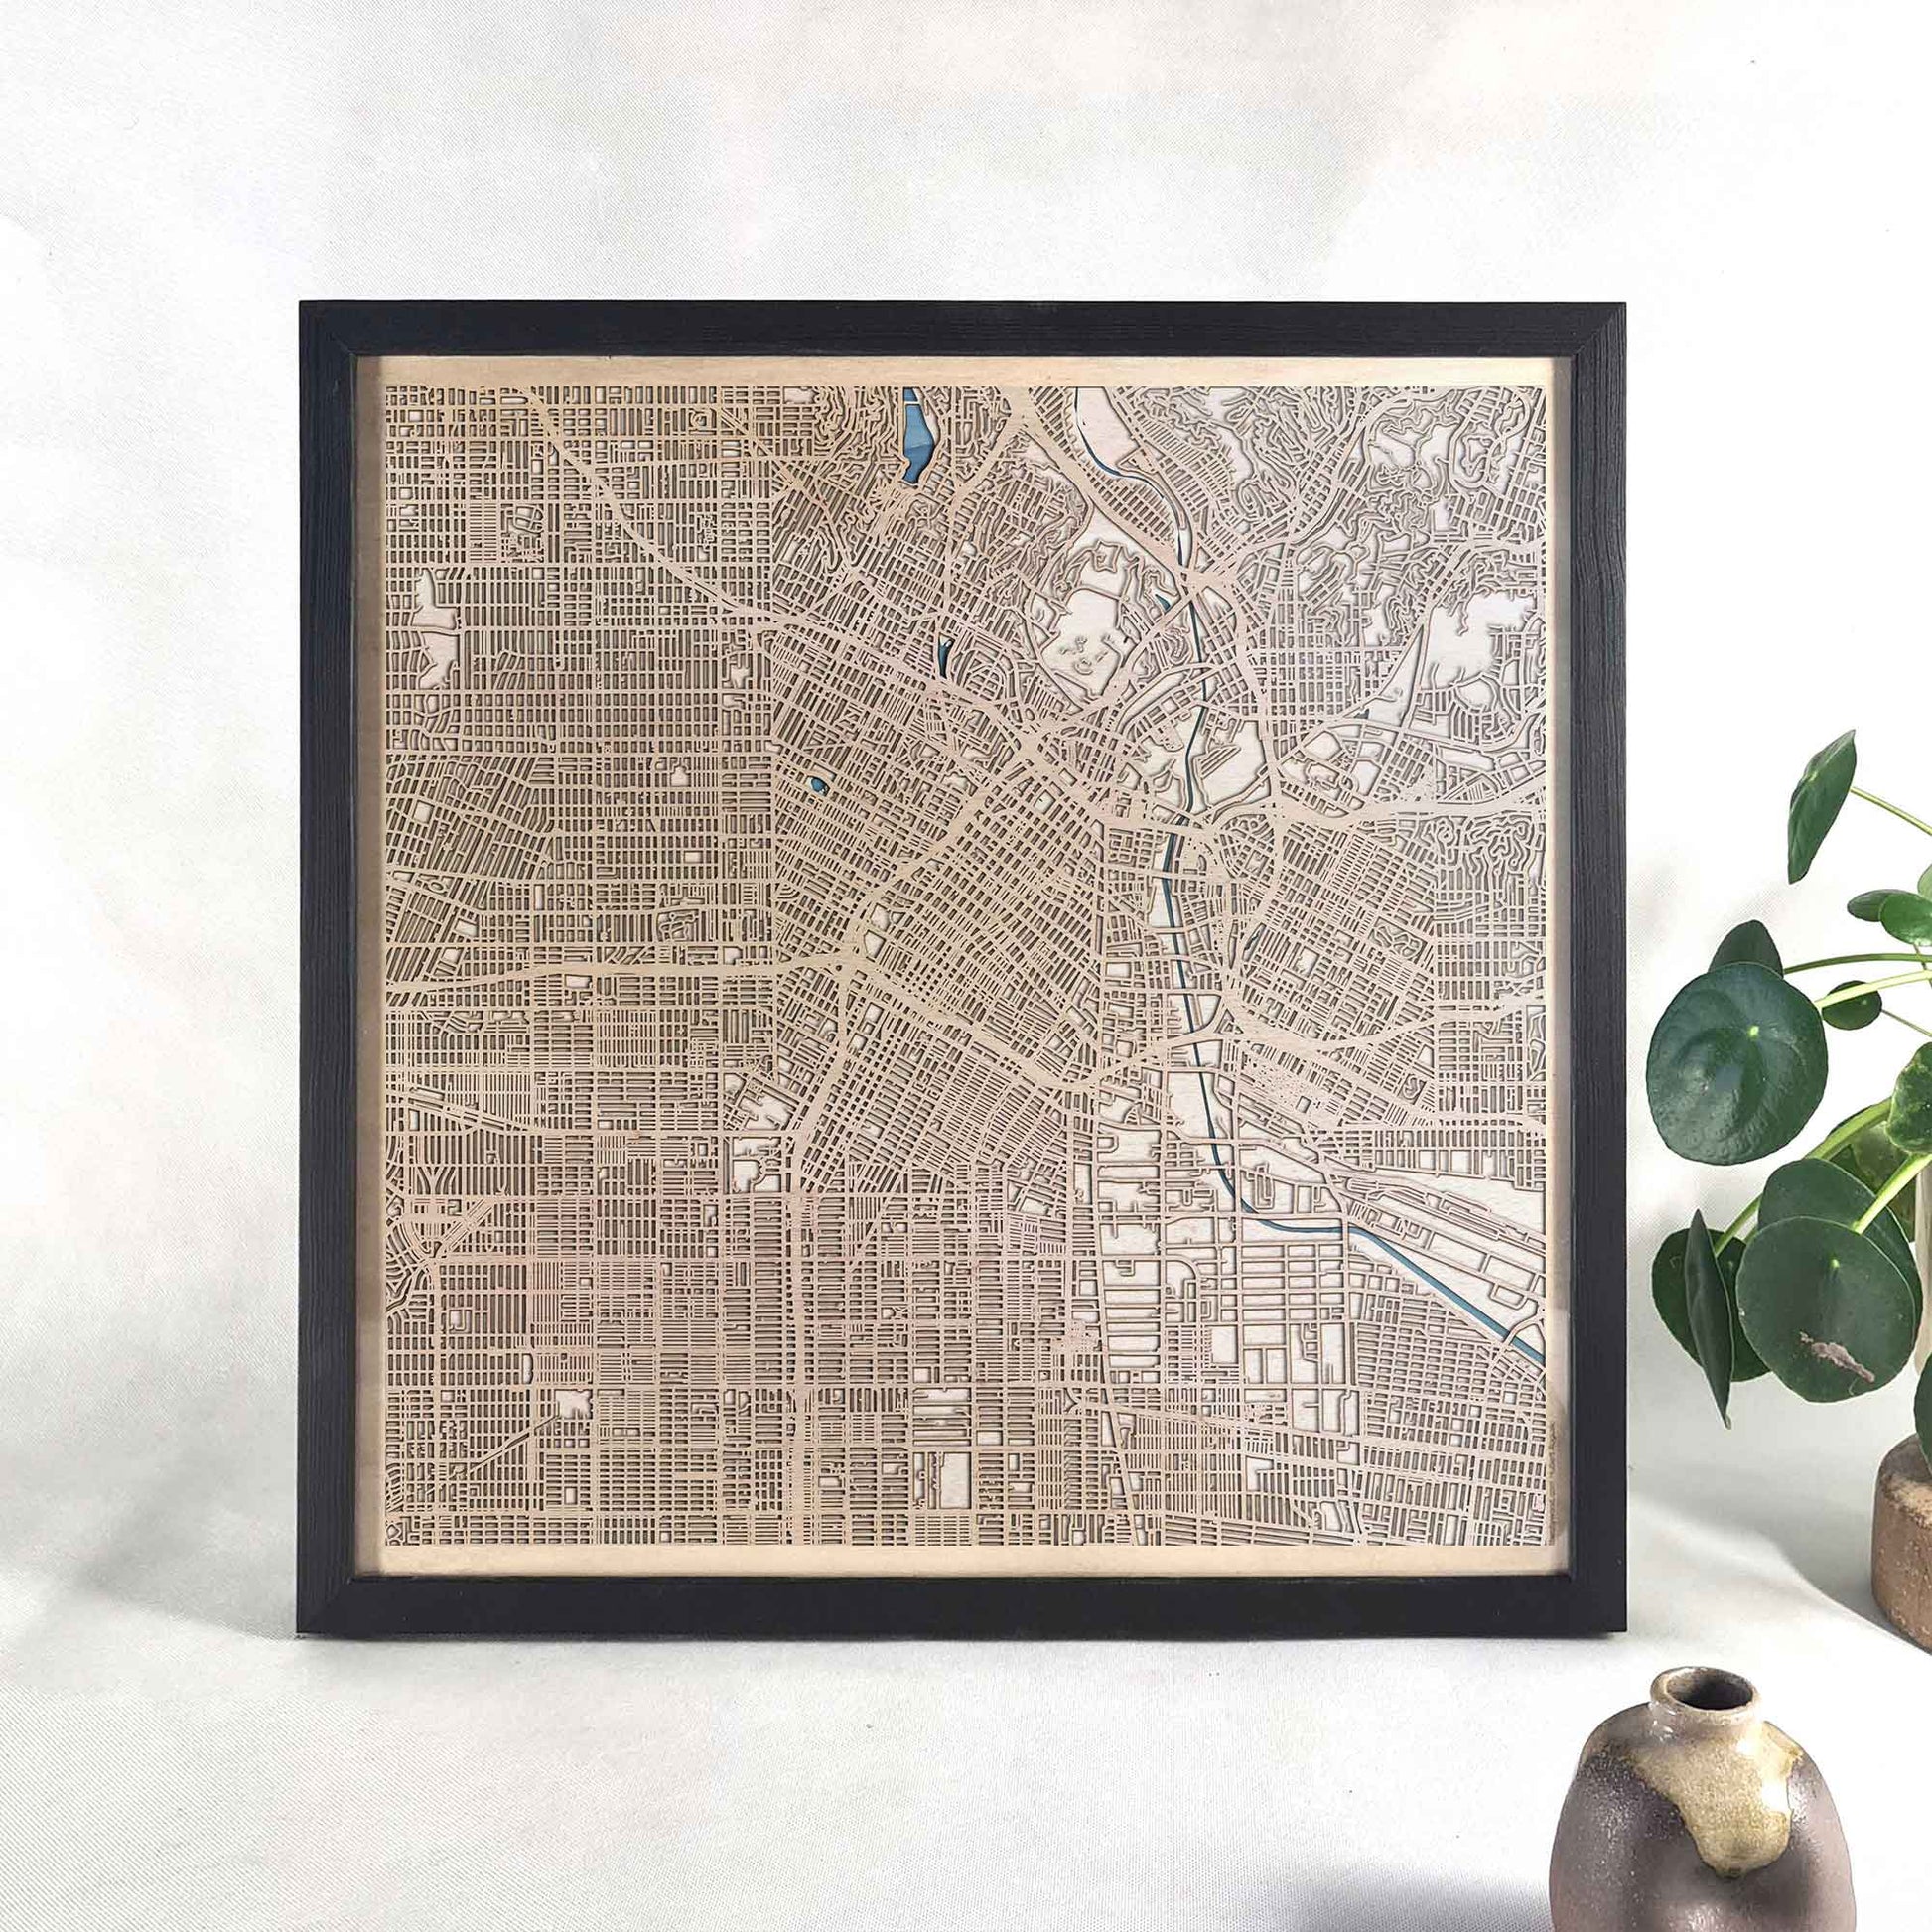 Los Angeles Wooden Map by CityWood - Custom Wood Map Art - Unique Laser Cut Engraved - Anniversary Gift